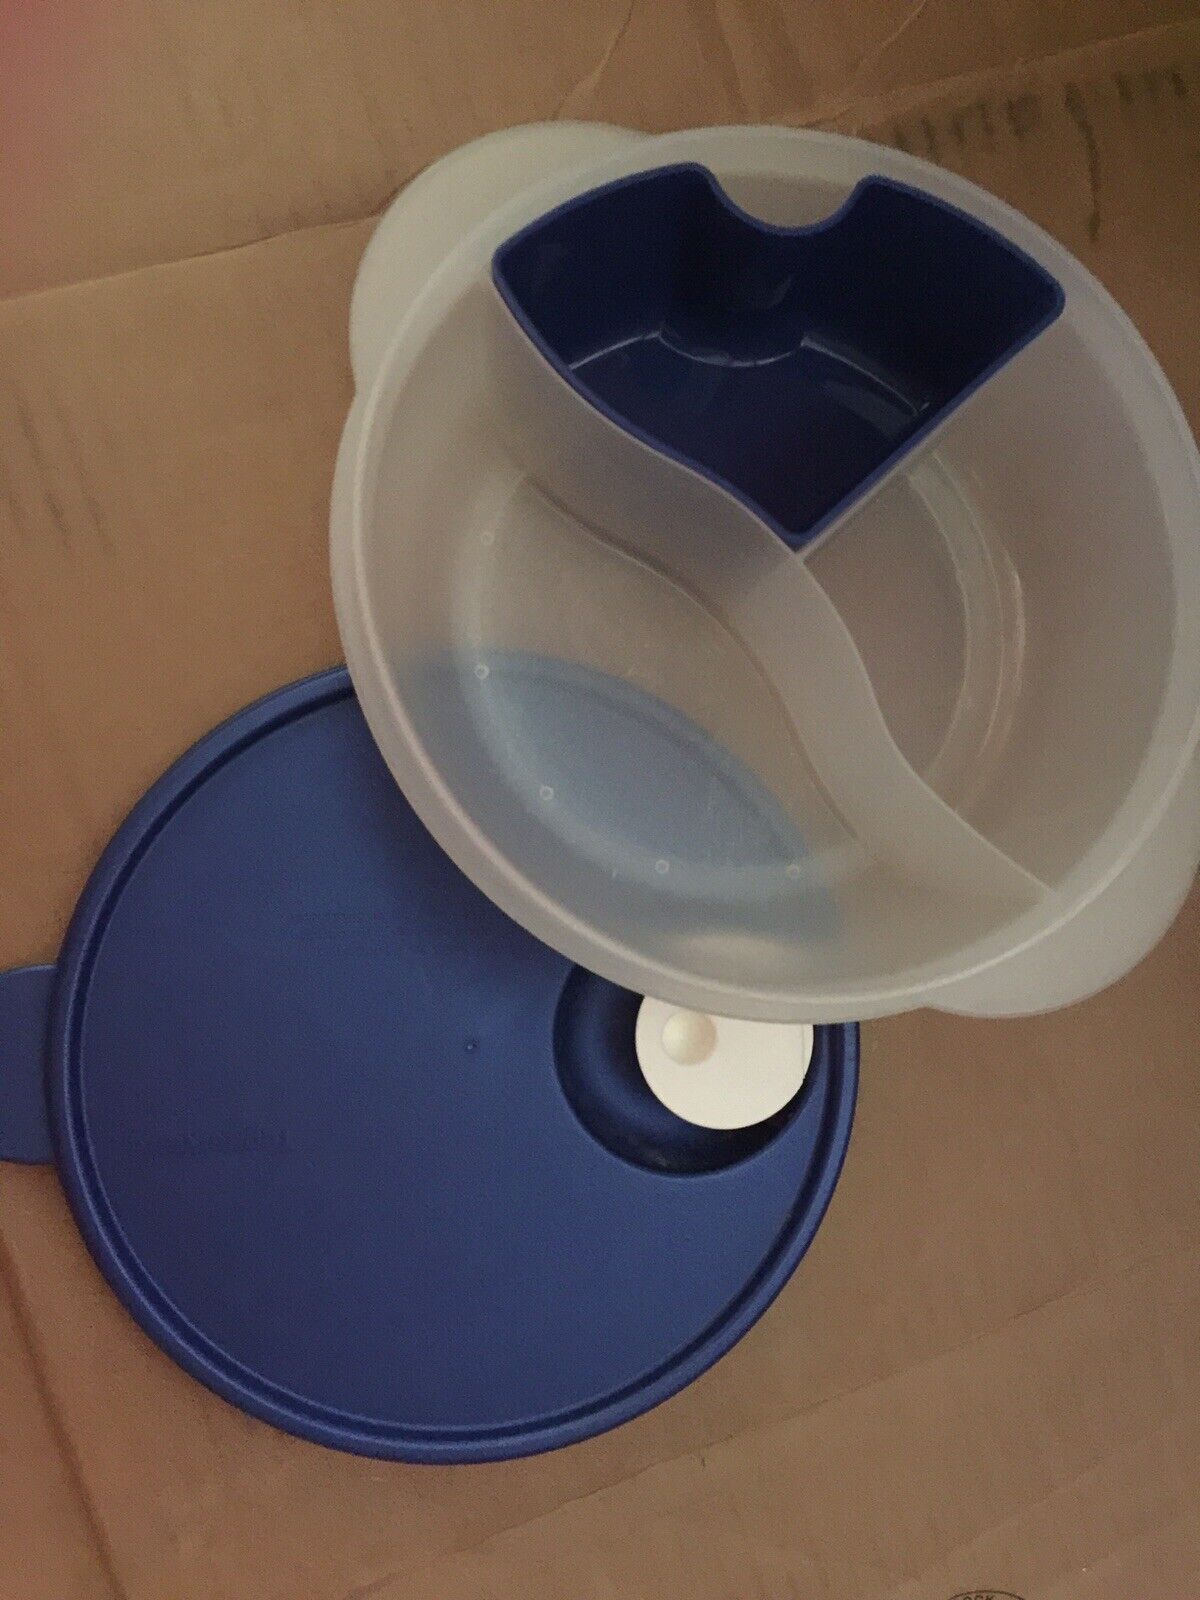 TUPPERWARE Max 88% OFF LUNCH CONTAINER Excellent COMPARTMENTS EEUC CLEAR ROUND BLUE